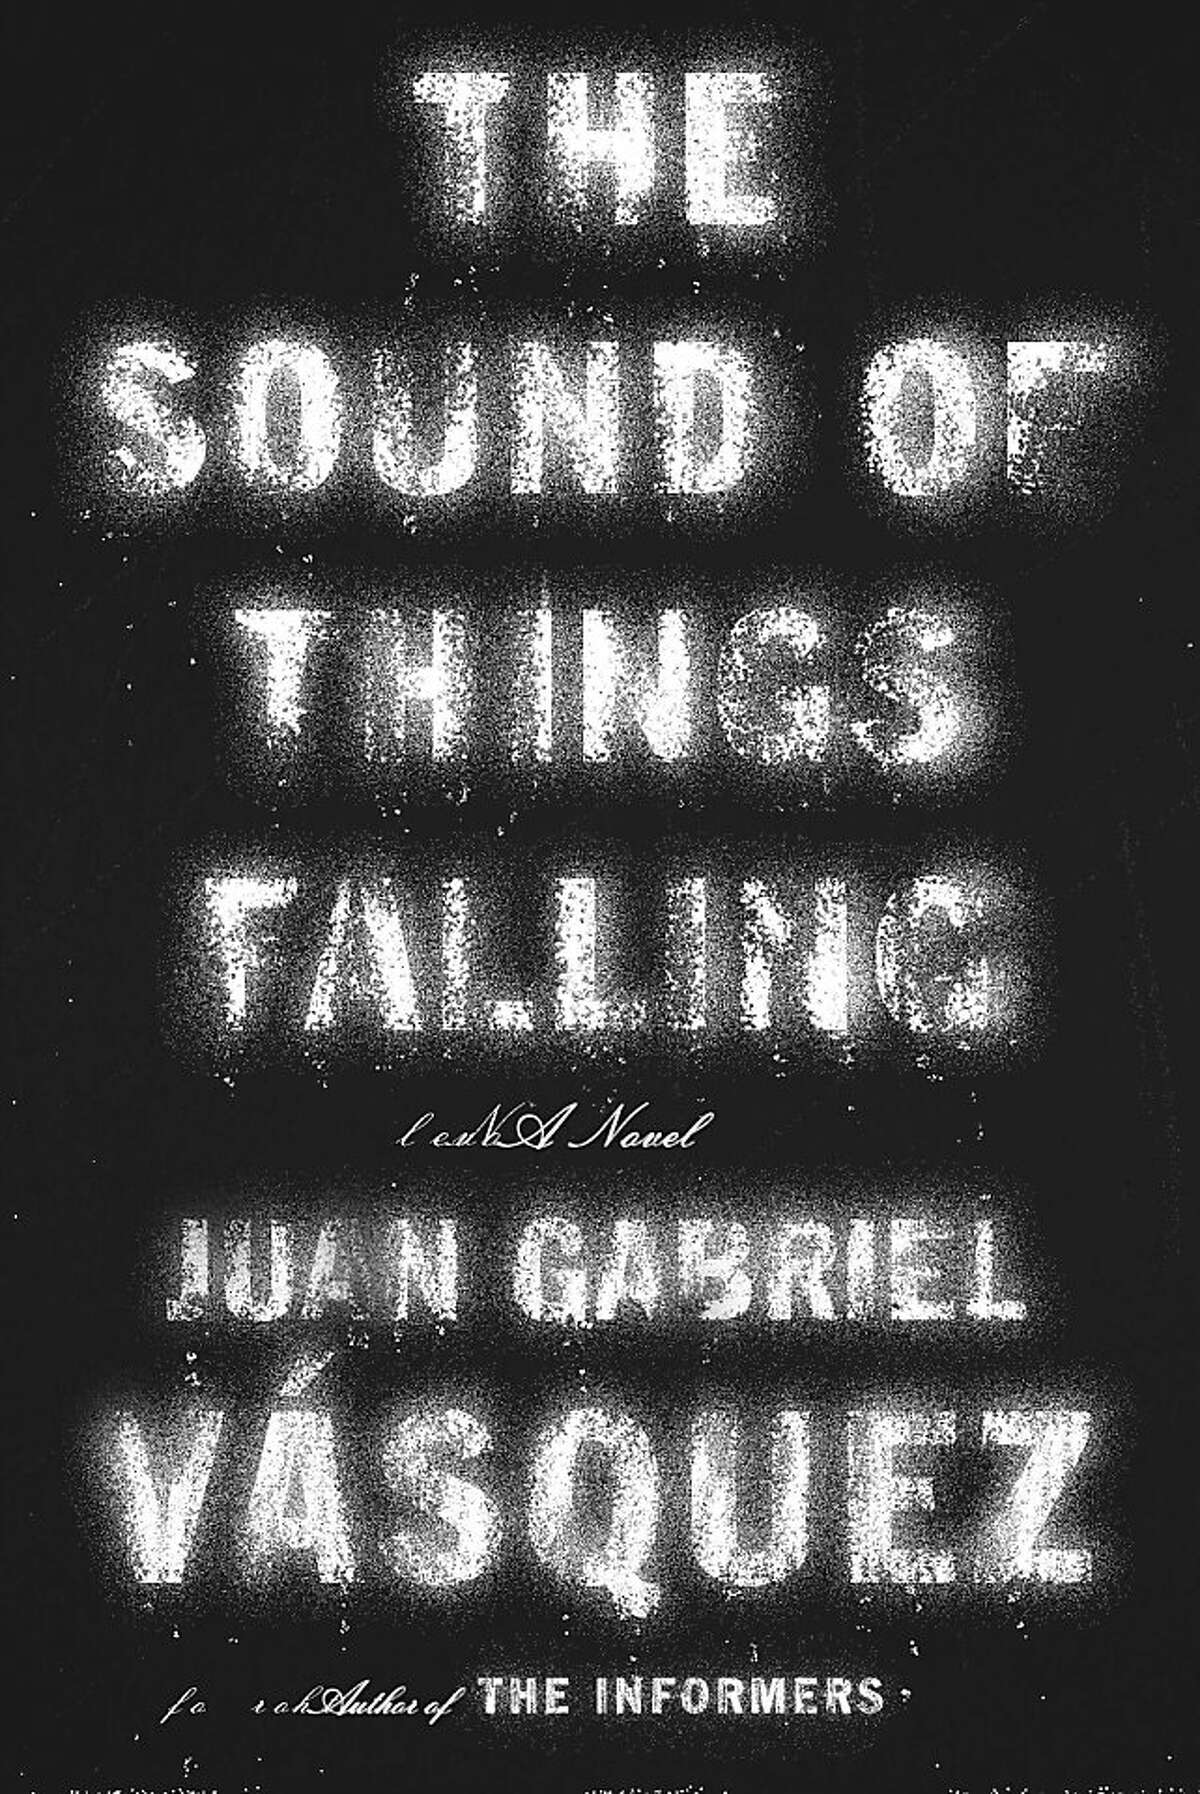 Cover of “The Sound of Things Falling,” a novel by Juan Gabriel Vásquez.